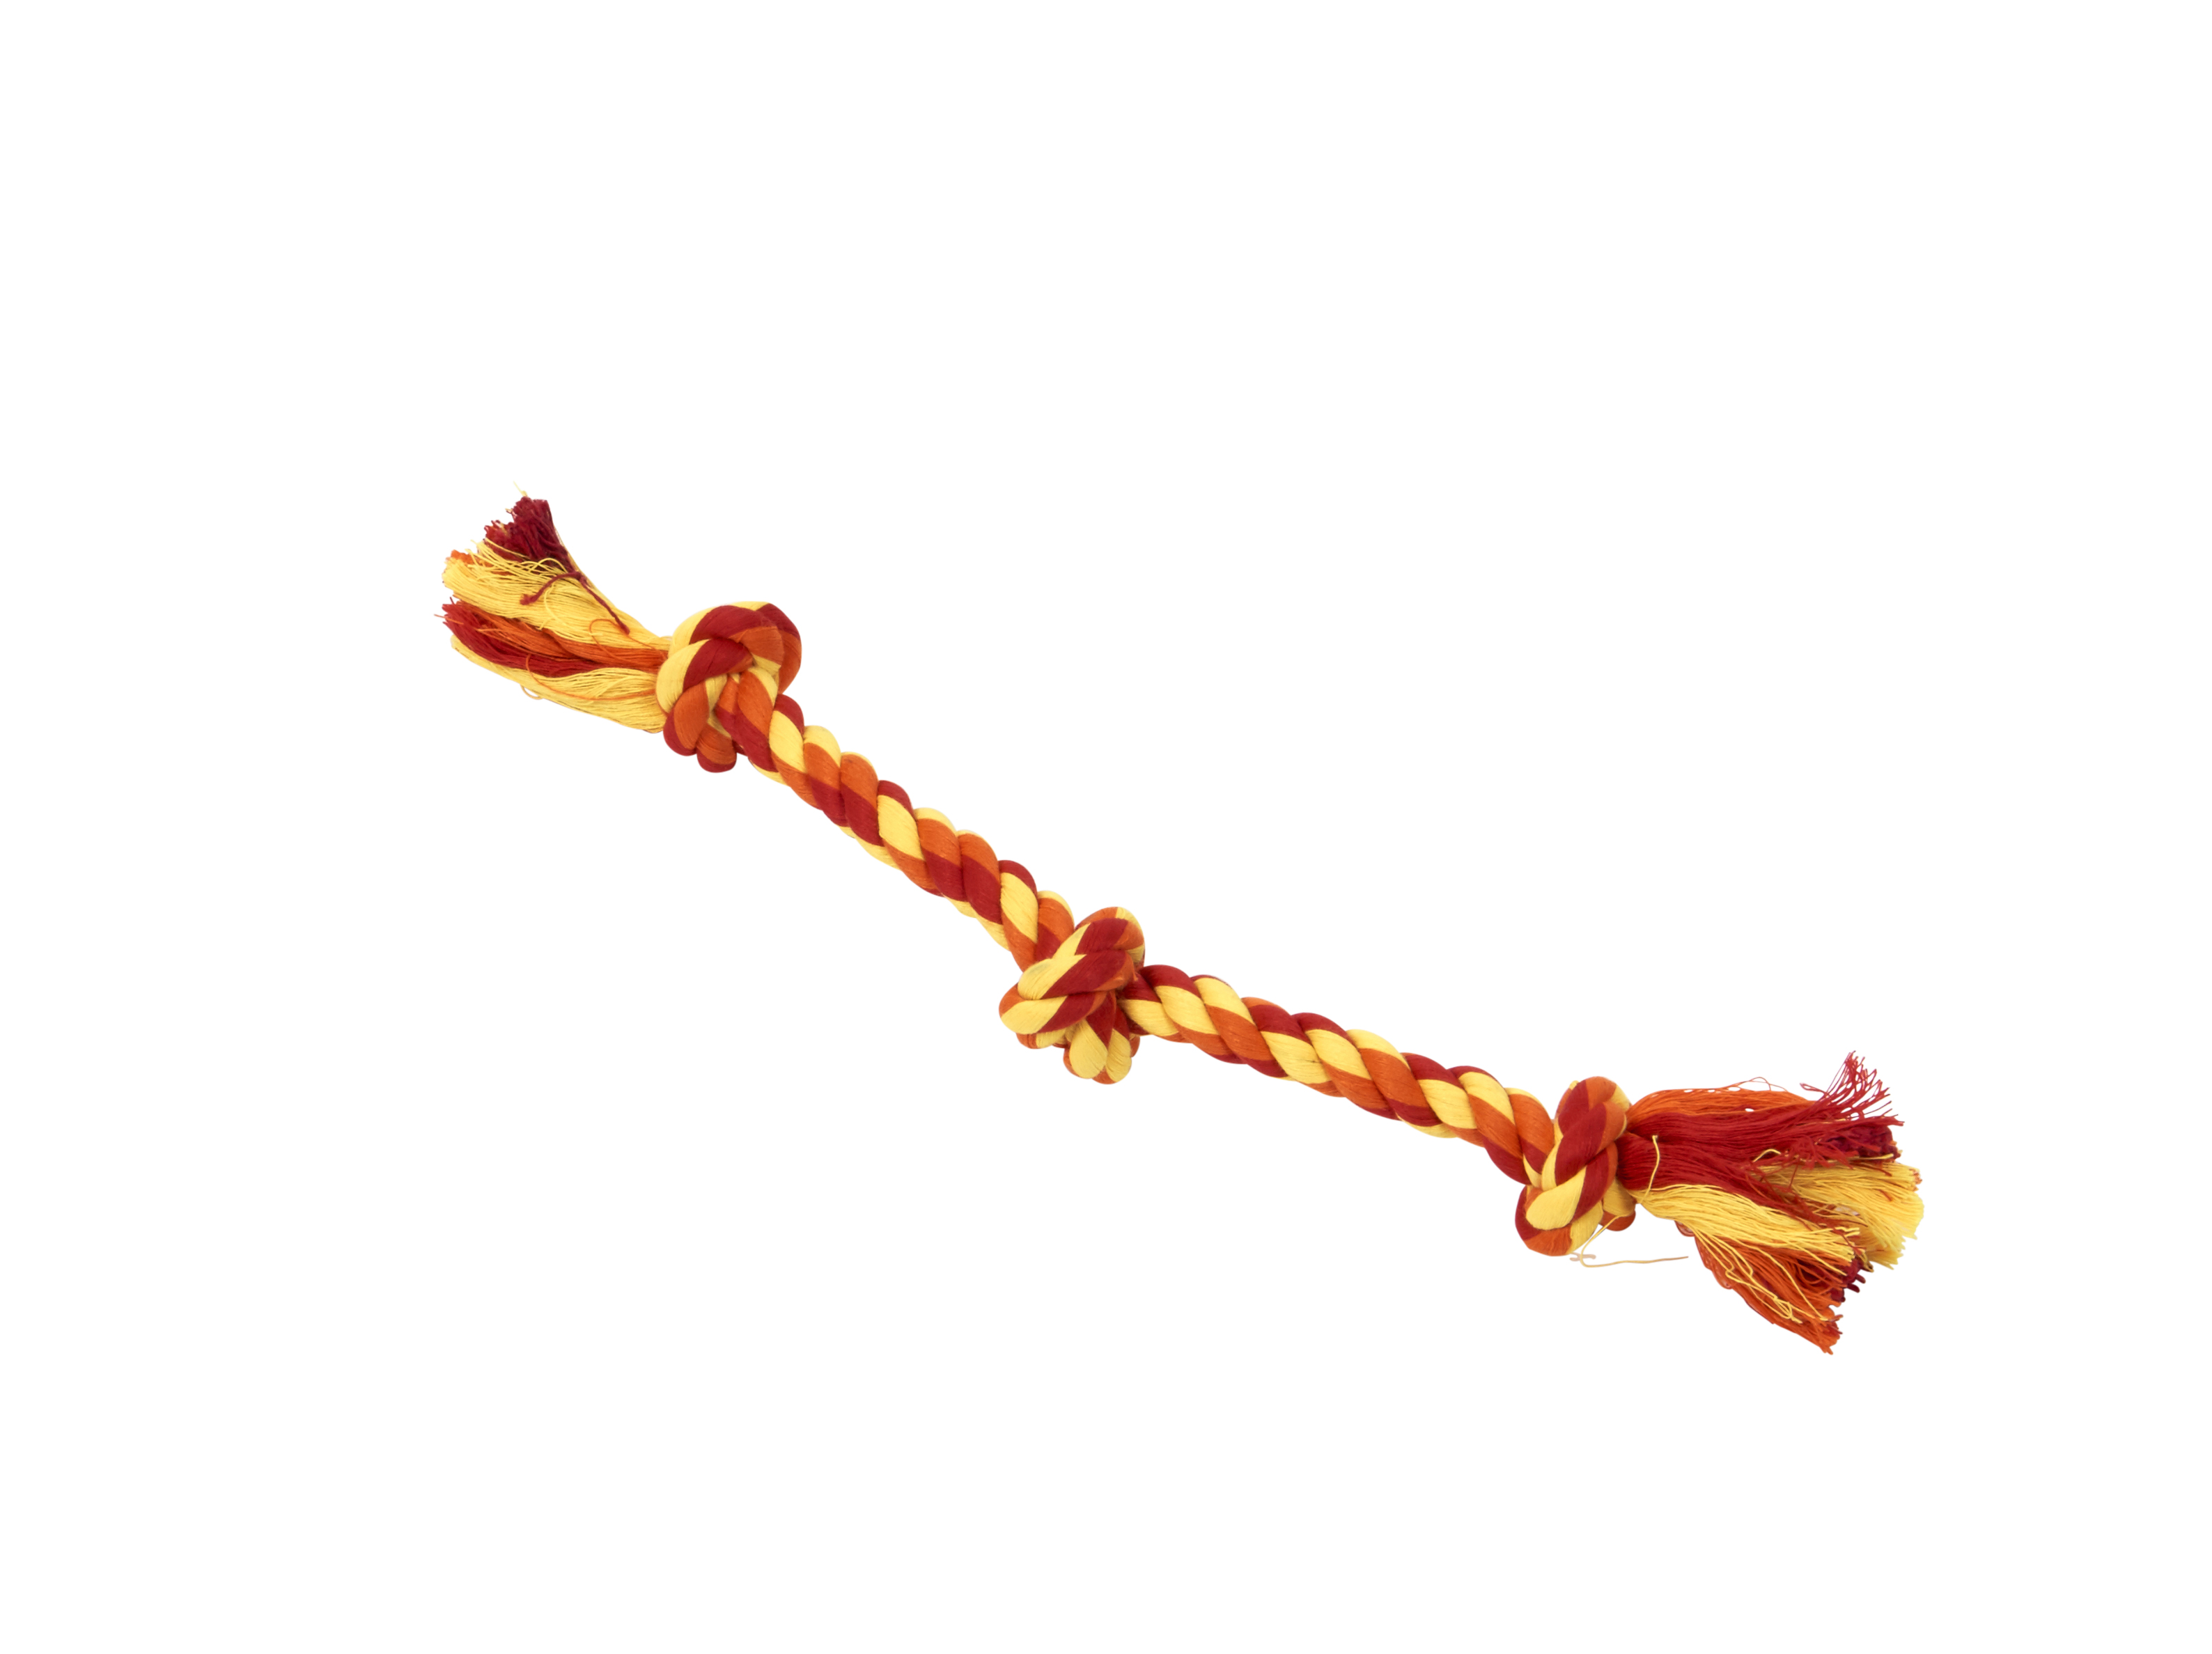 BUSTER Colour Dental Rope 3-Knot, red/orange/yellow